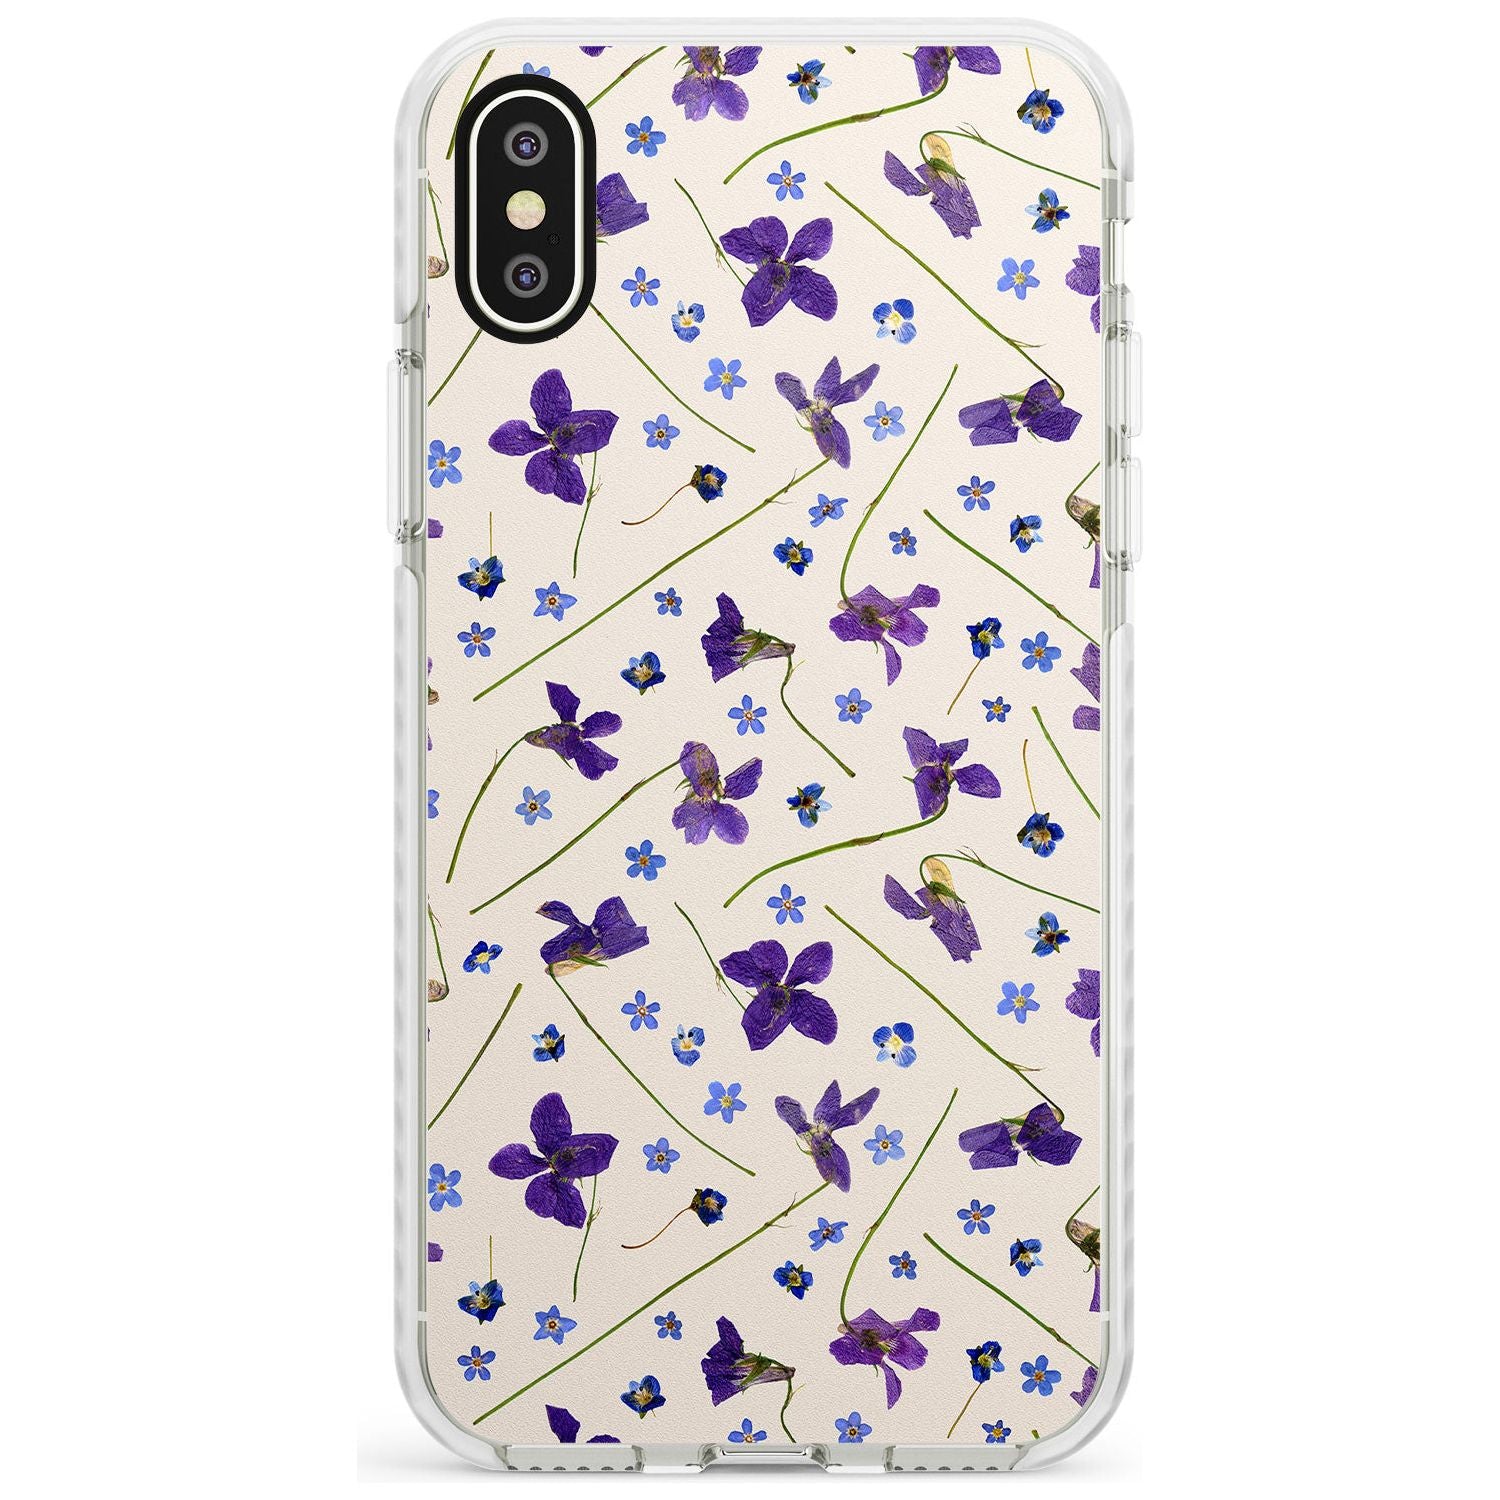 Violet Floral Pattern Design - Cream Impact Phone Case for iPhone X XS Max XR